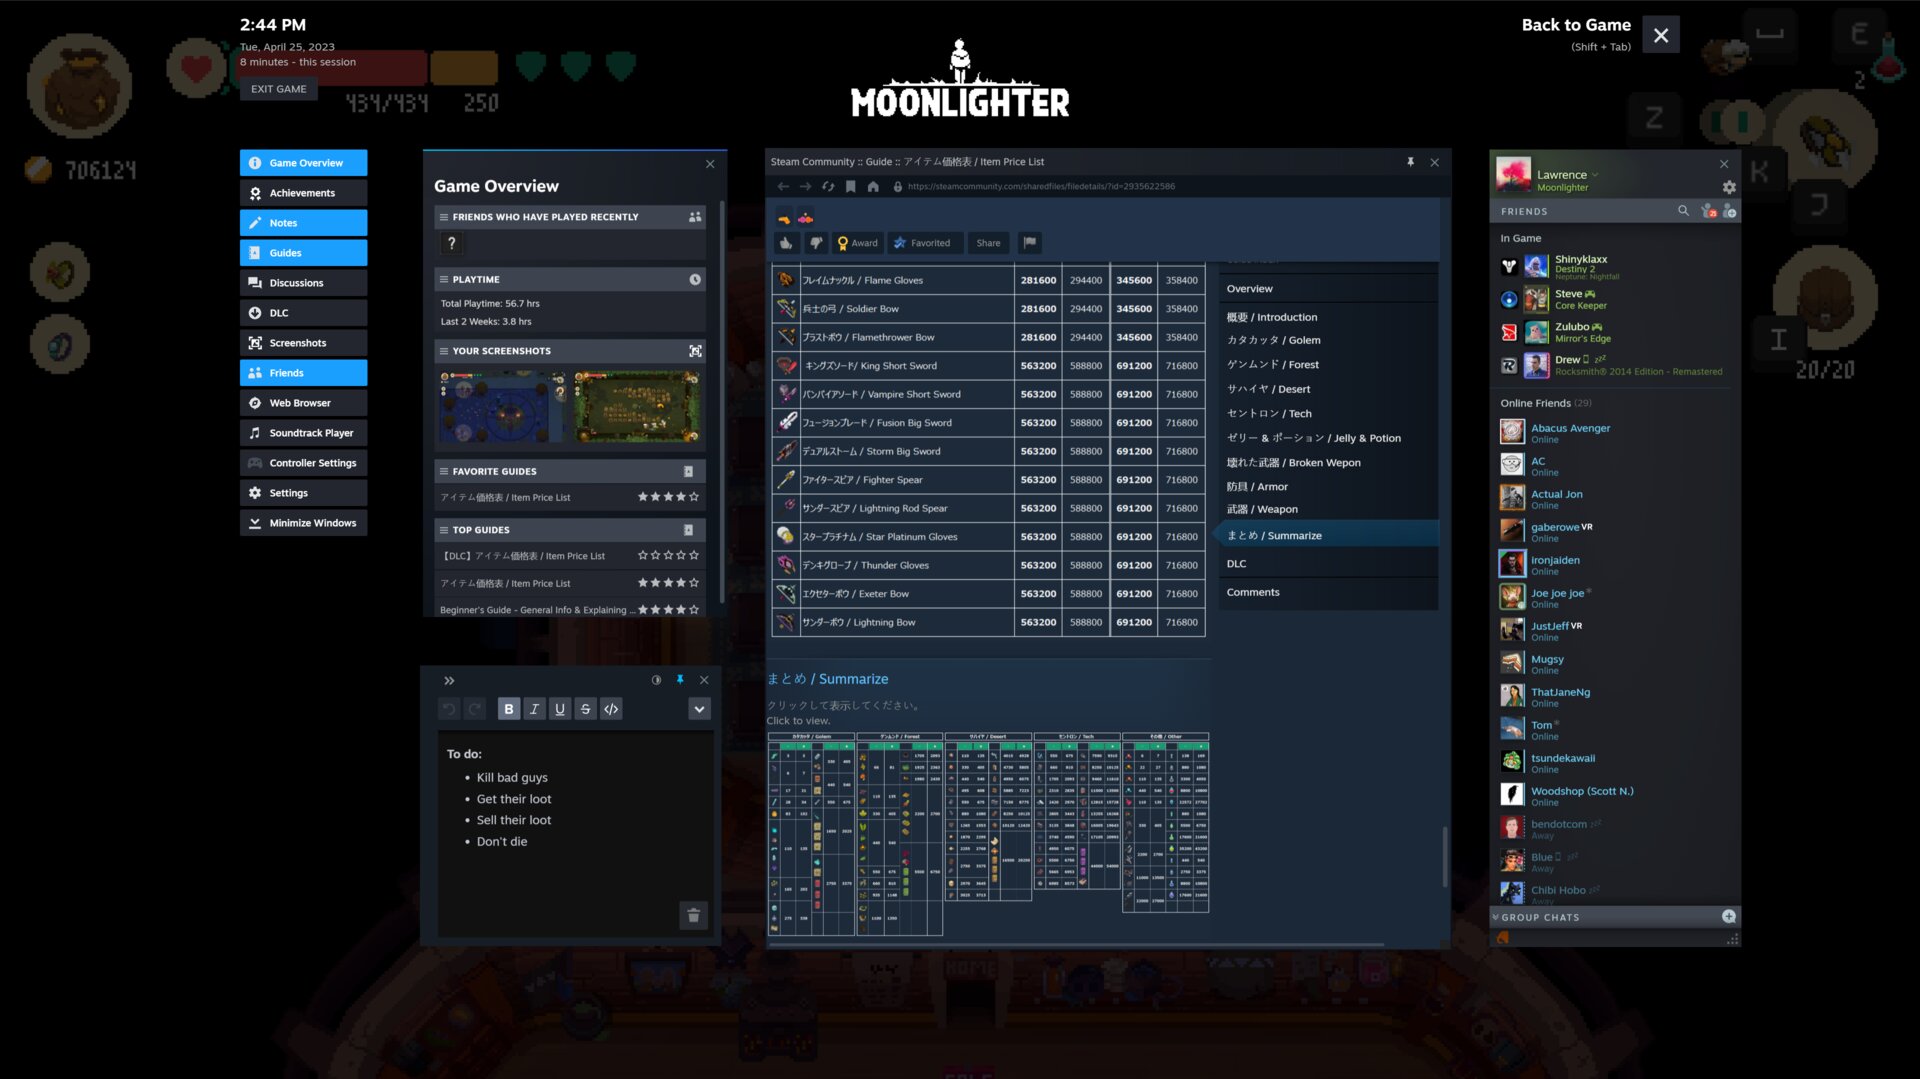 New Steam overlay with toolbar on the left